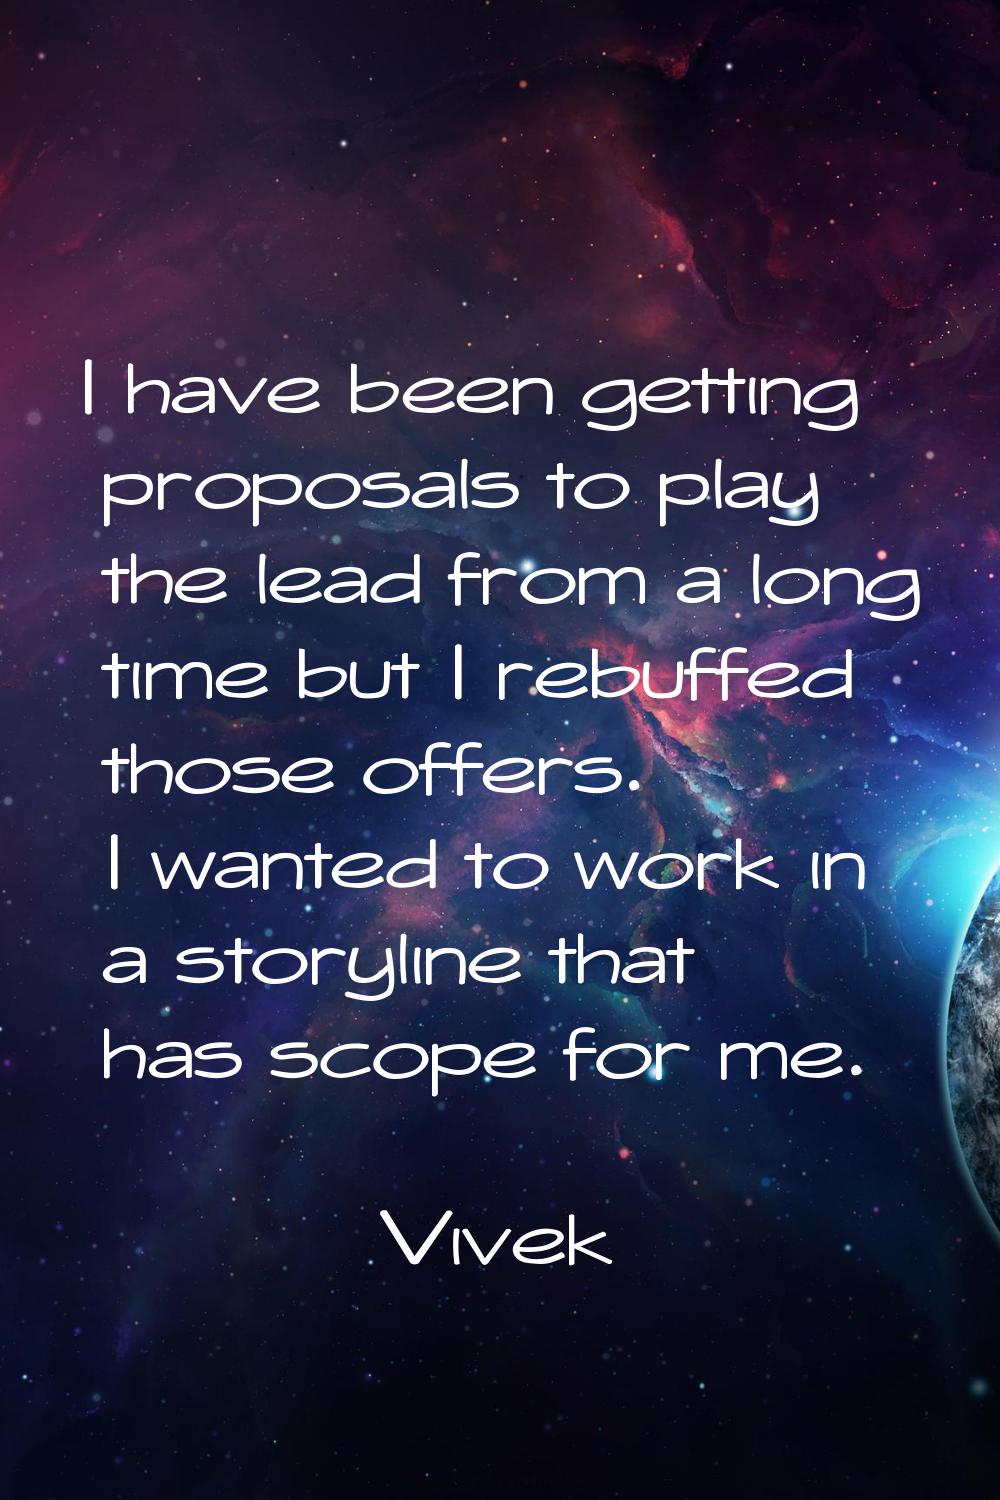 I have been getting proposals to play the lead from a long time but I rebuffed those offers. I want